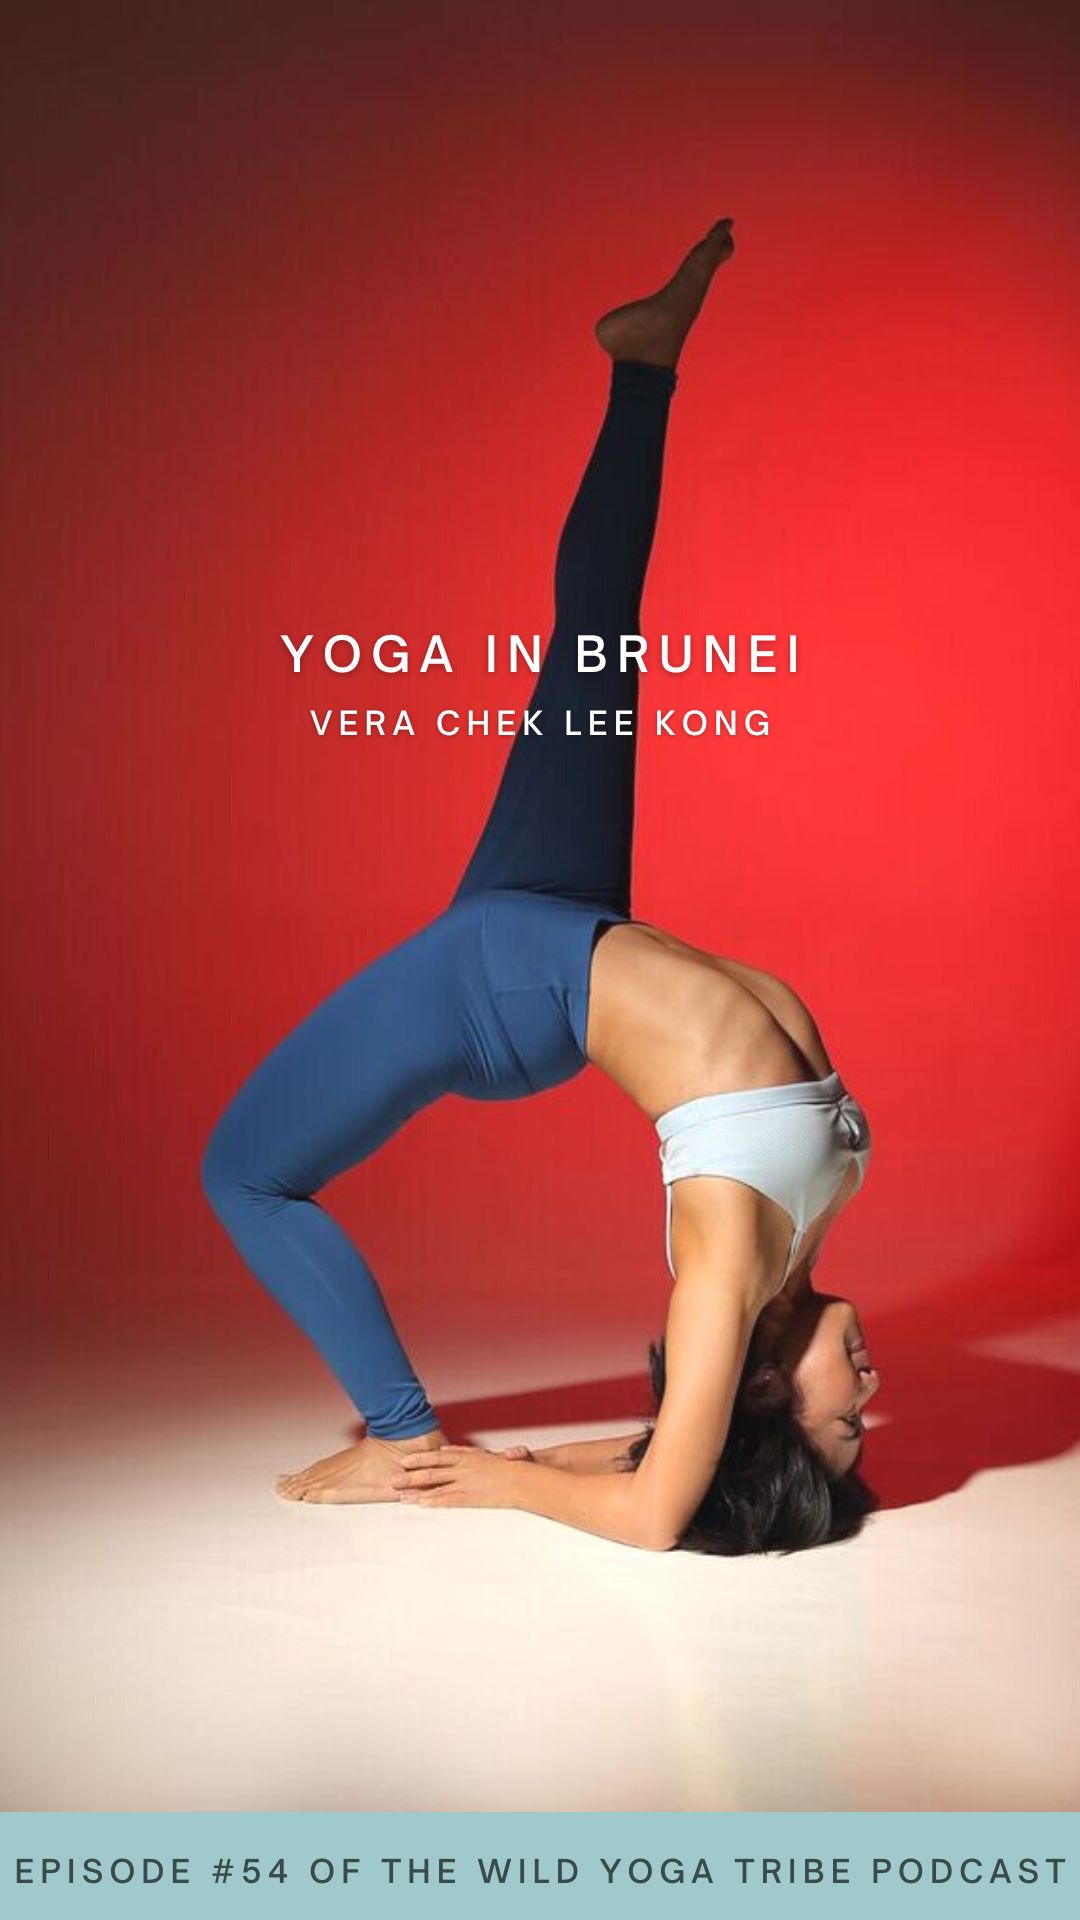 Meet Vera, a yoga teacher from Brunei, who shares with us all about what Universal Yoga is as well as advice for yoga teachers everywhere. Welcome to yoga in Brunei!